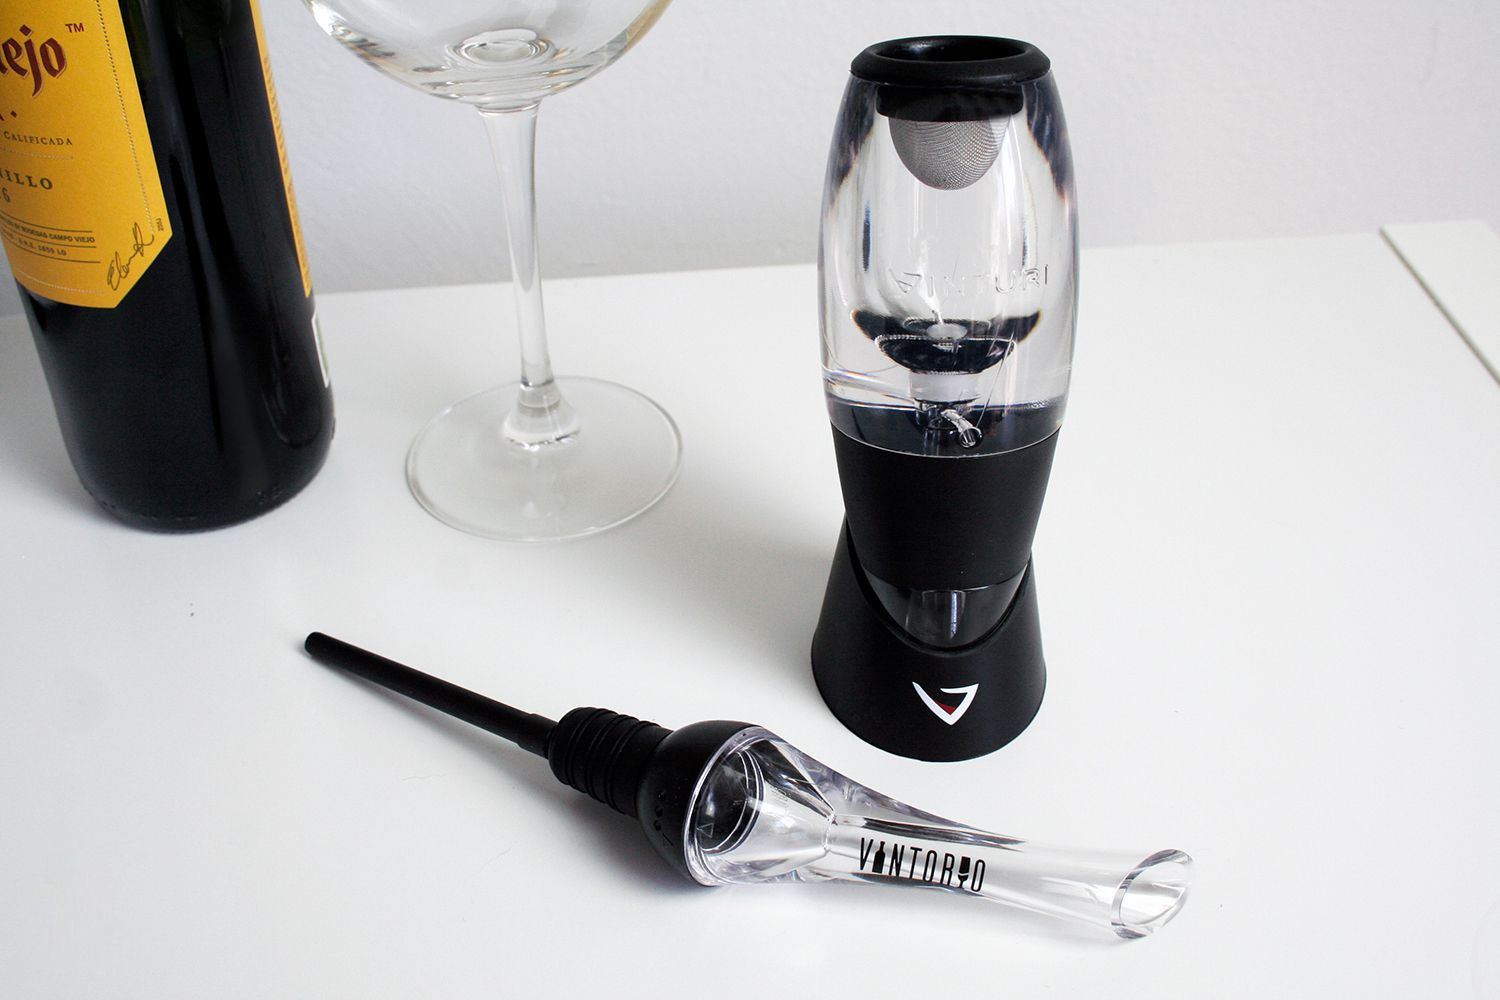 Review: Best Wine Aerator for Enhanced Flavors